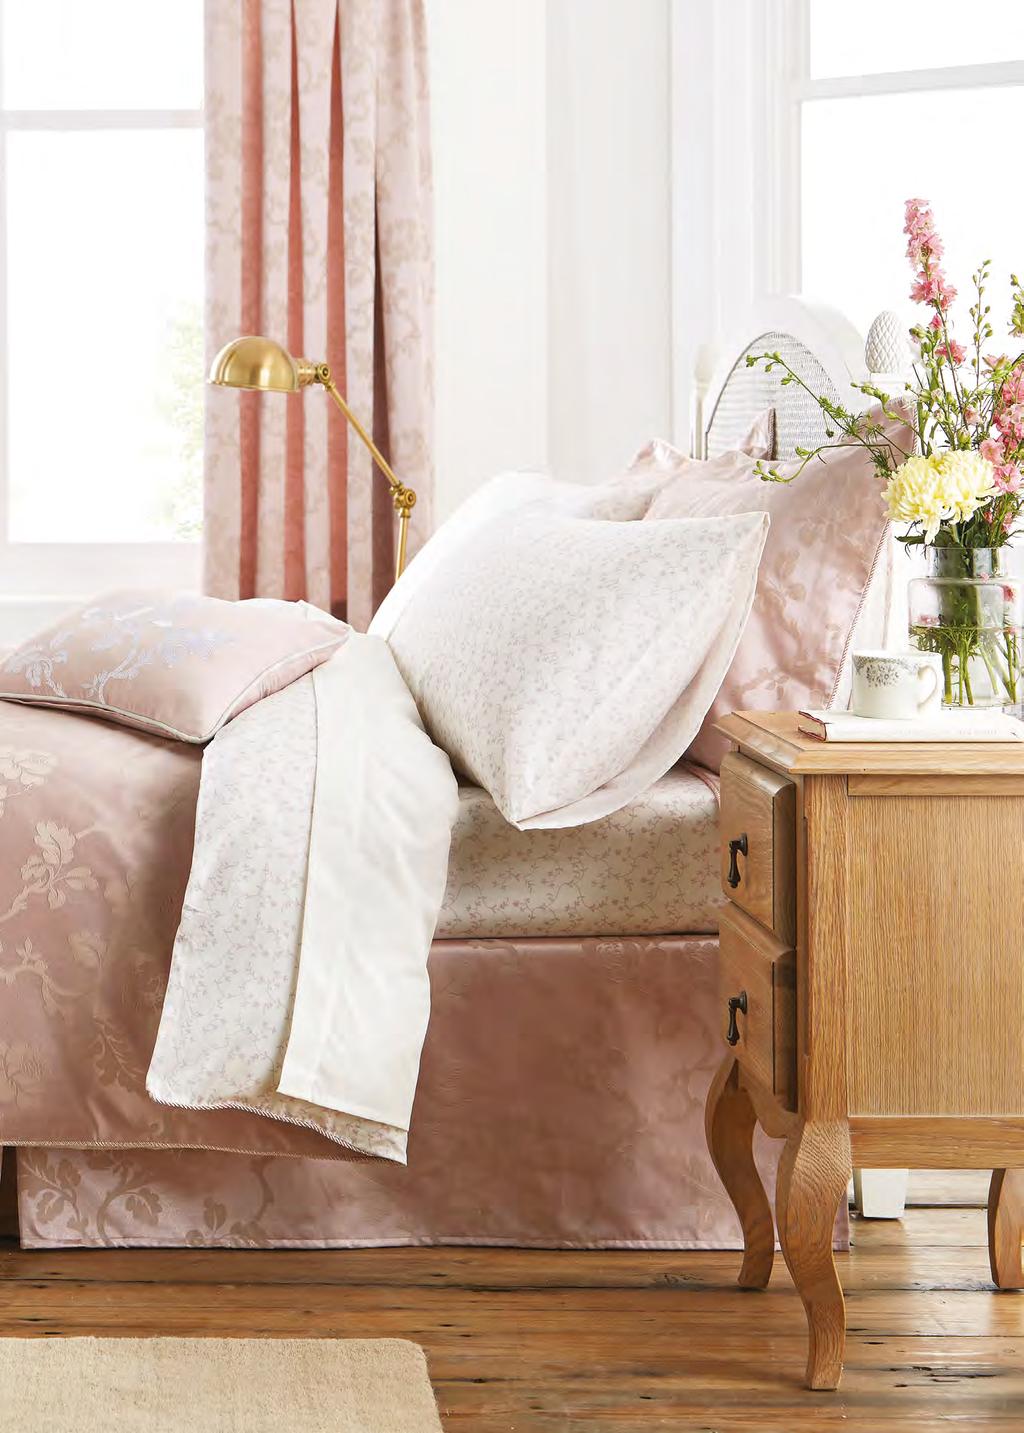 V&A Viennese Rose Bedlinen Available in Mint